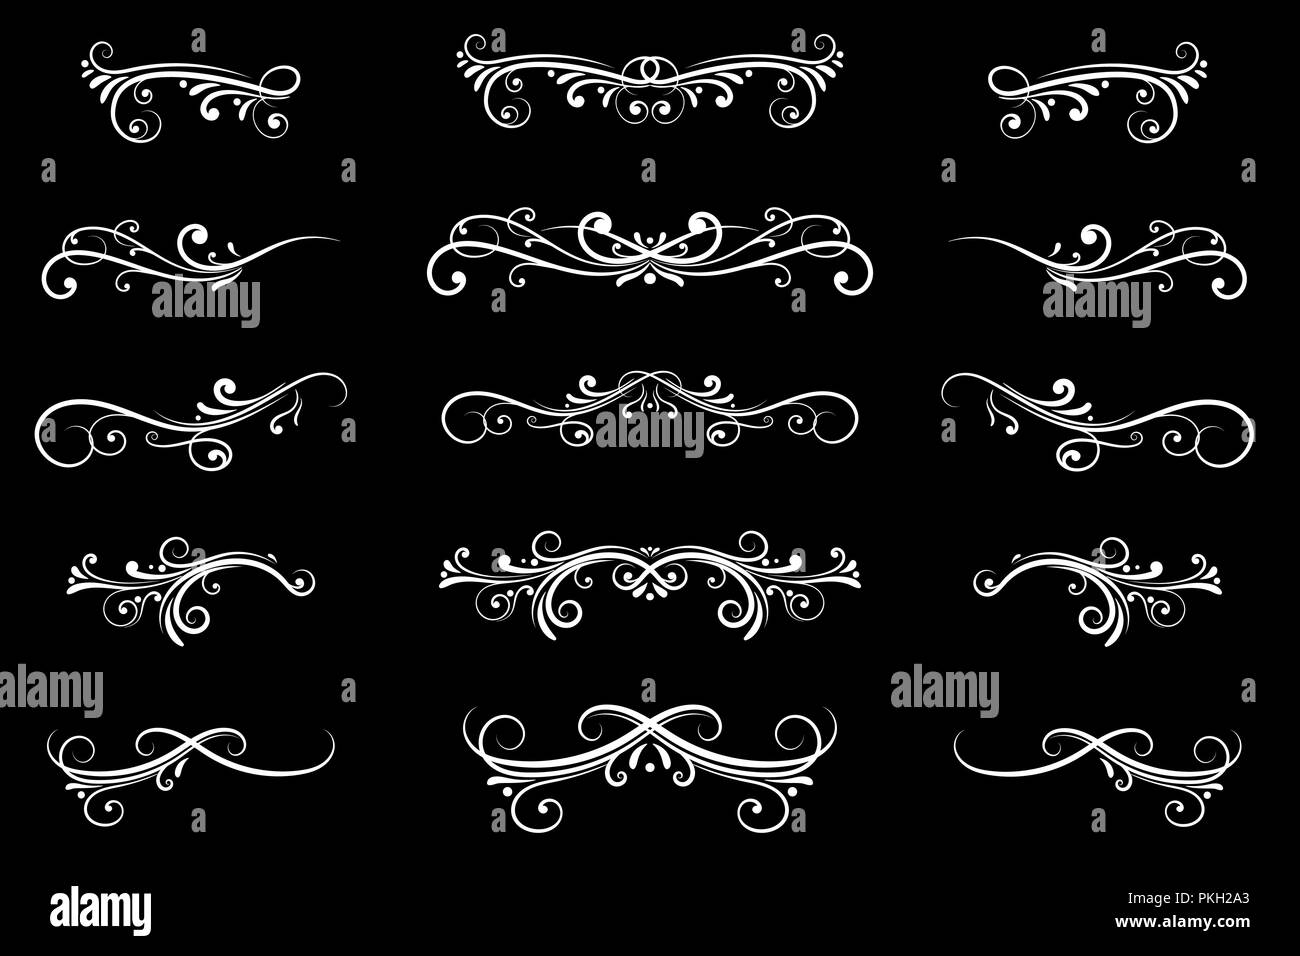 Dividers. White filigree floral decorations on black background Stock Vector